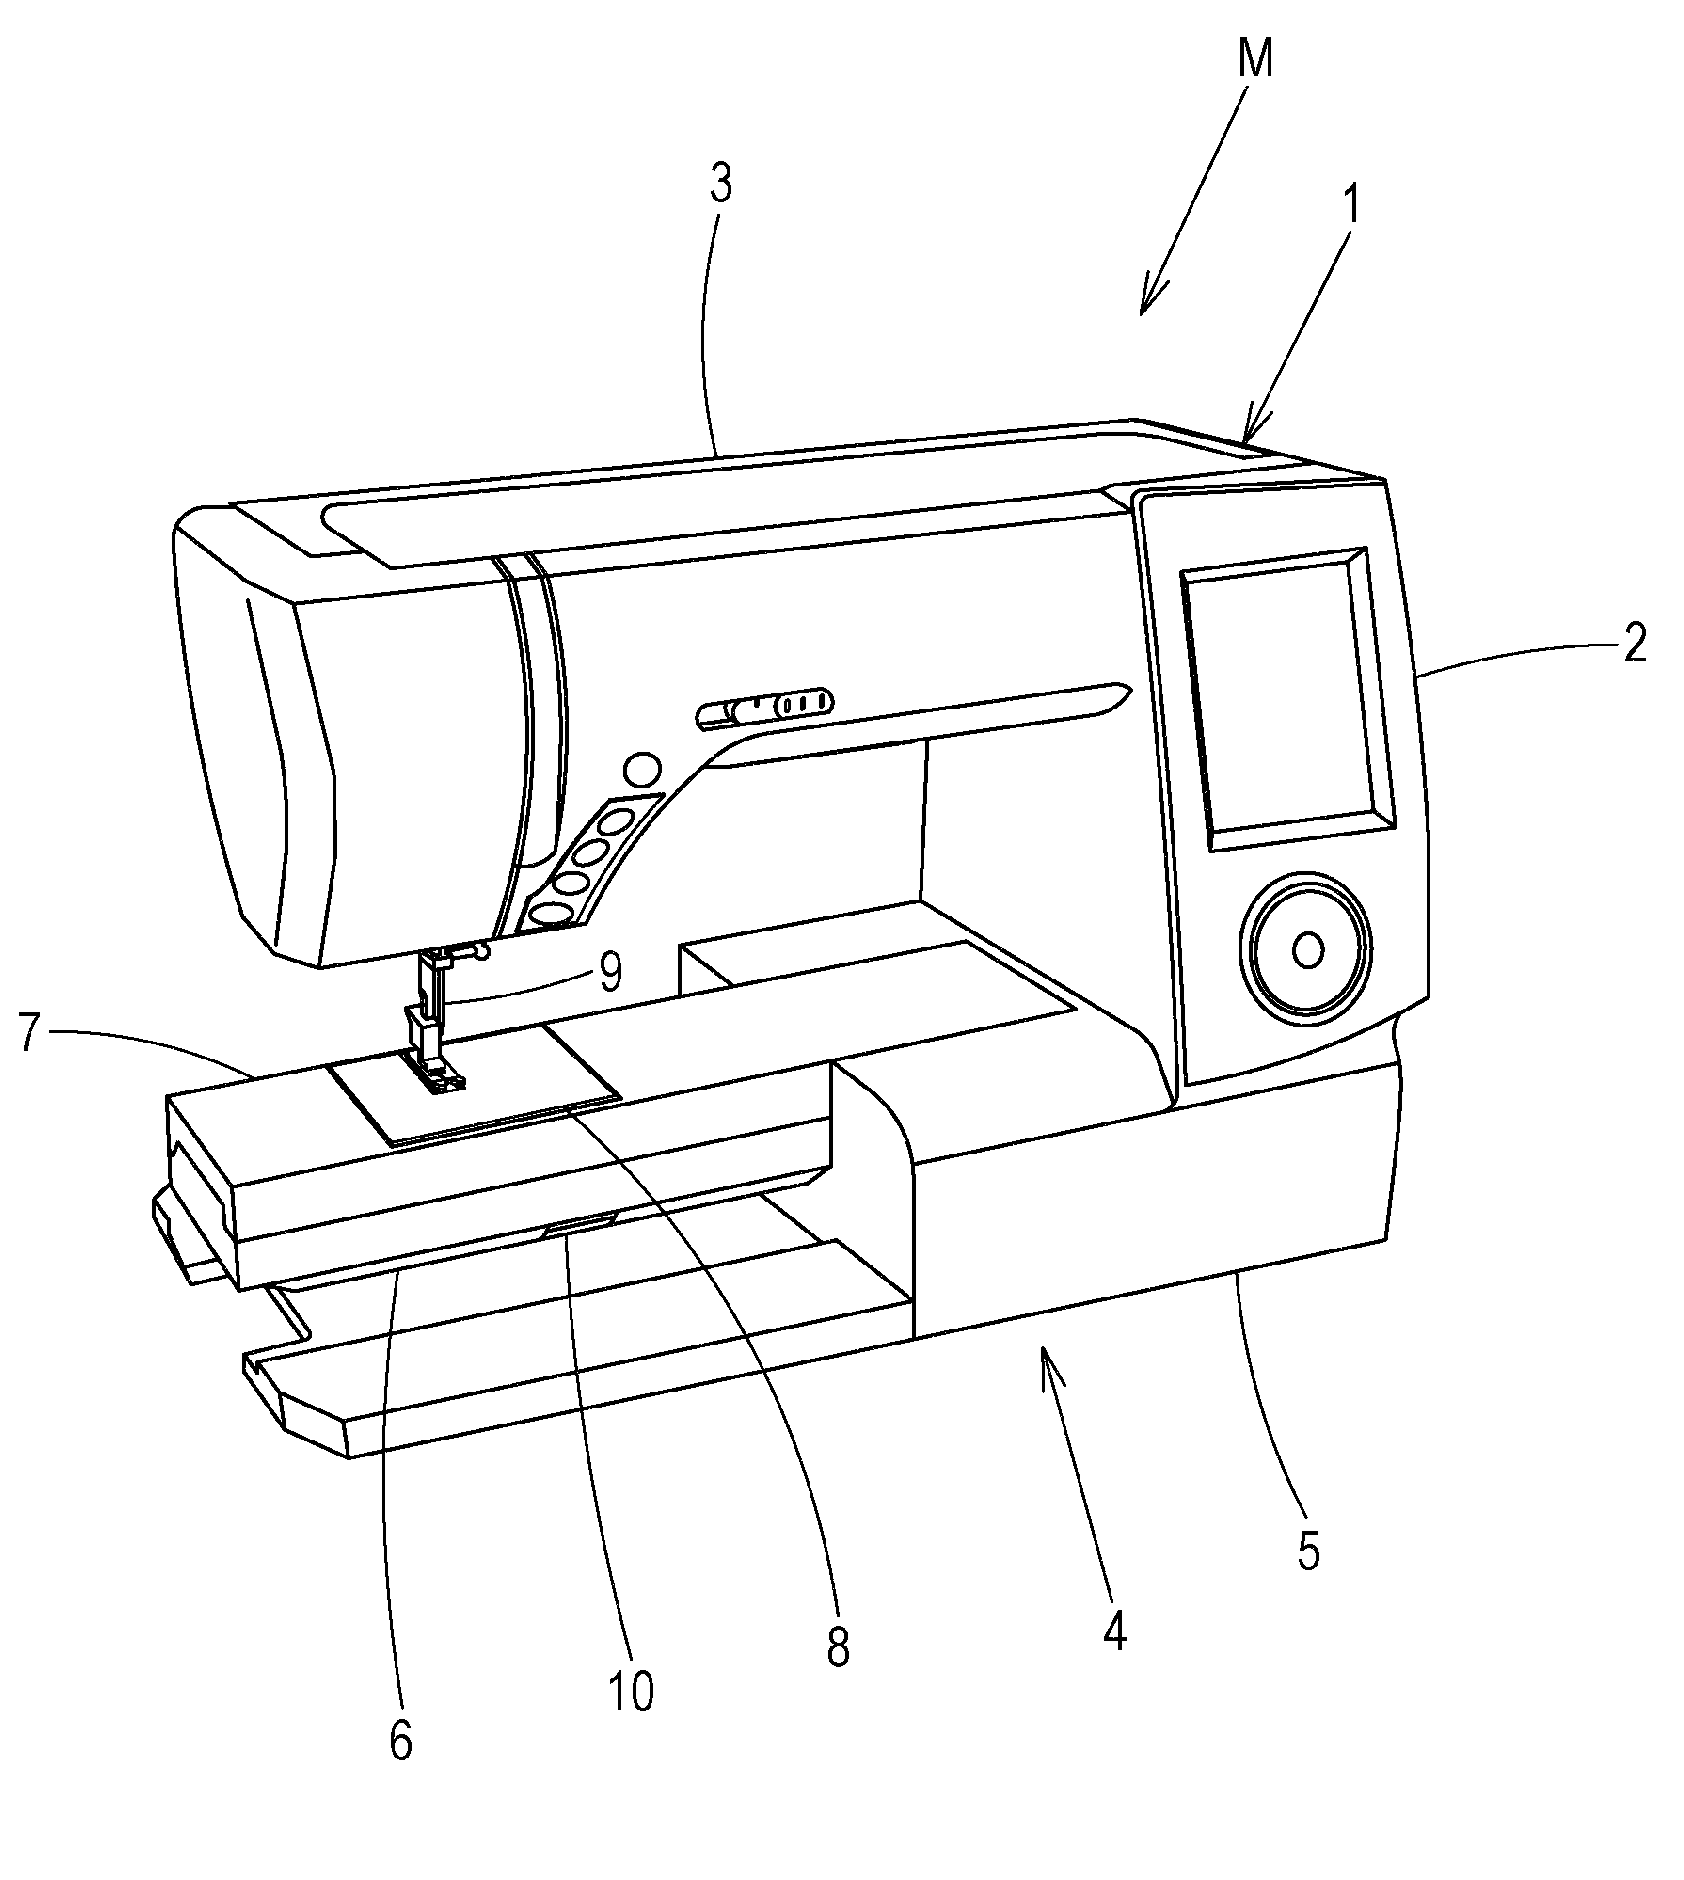 Needle plate replacement device with lock